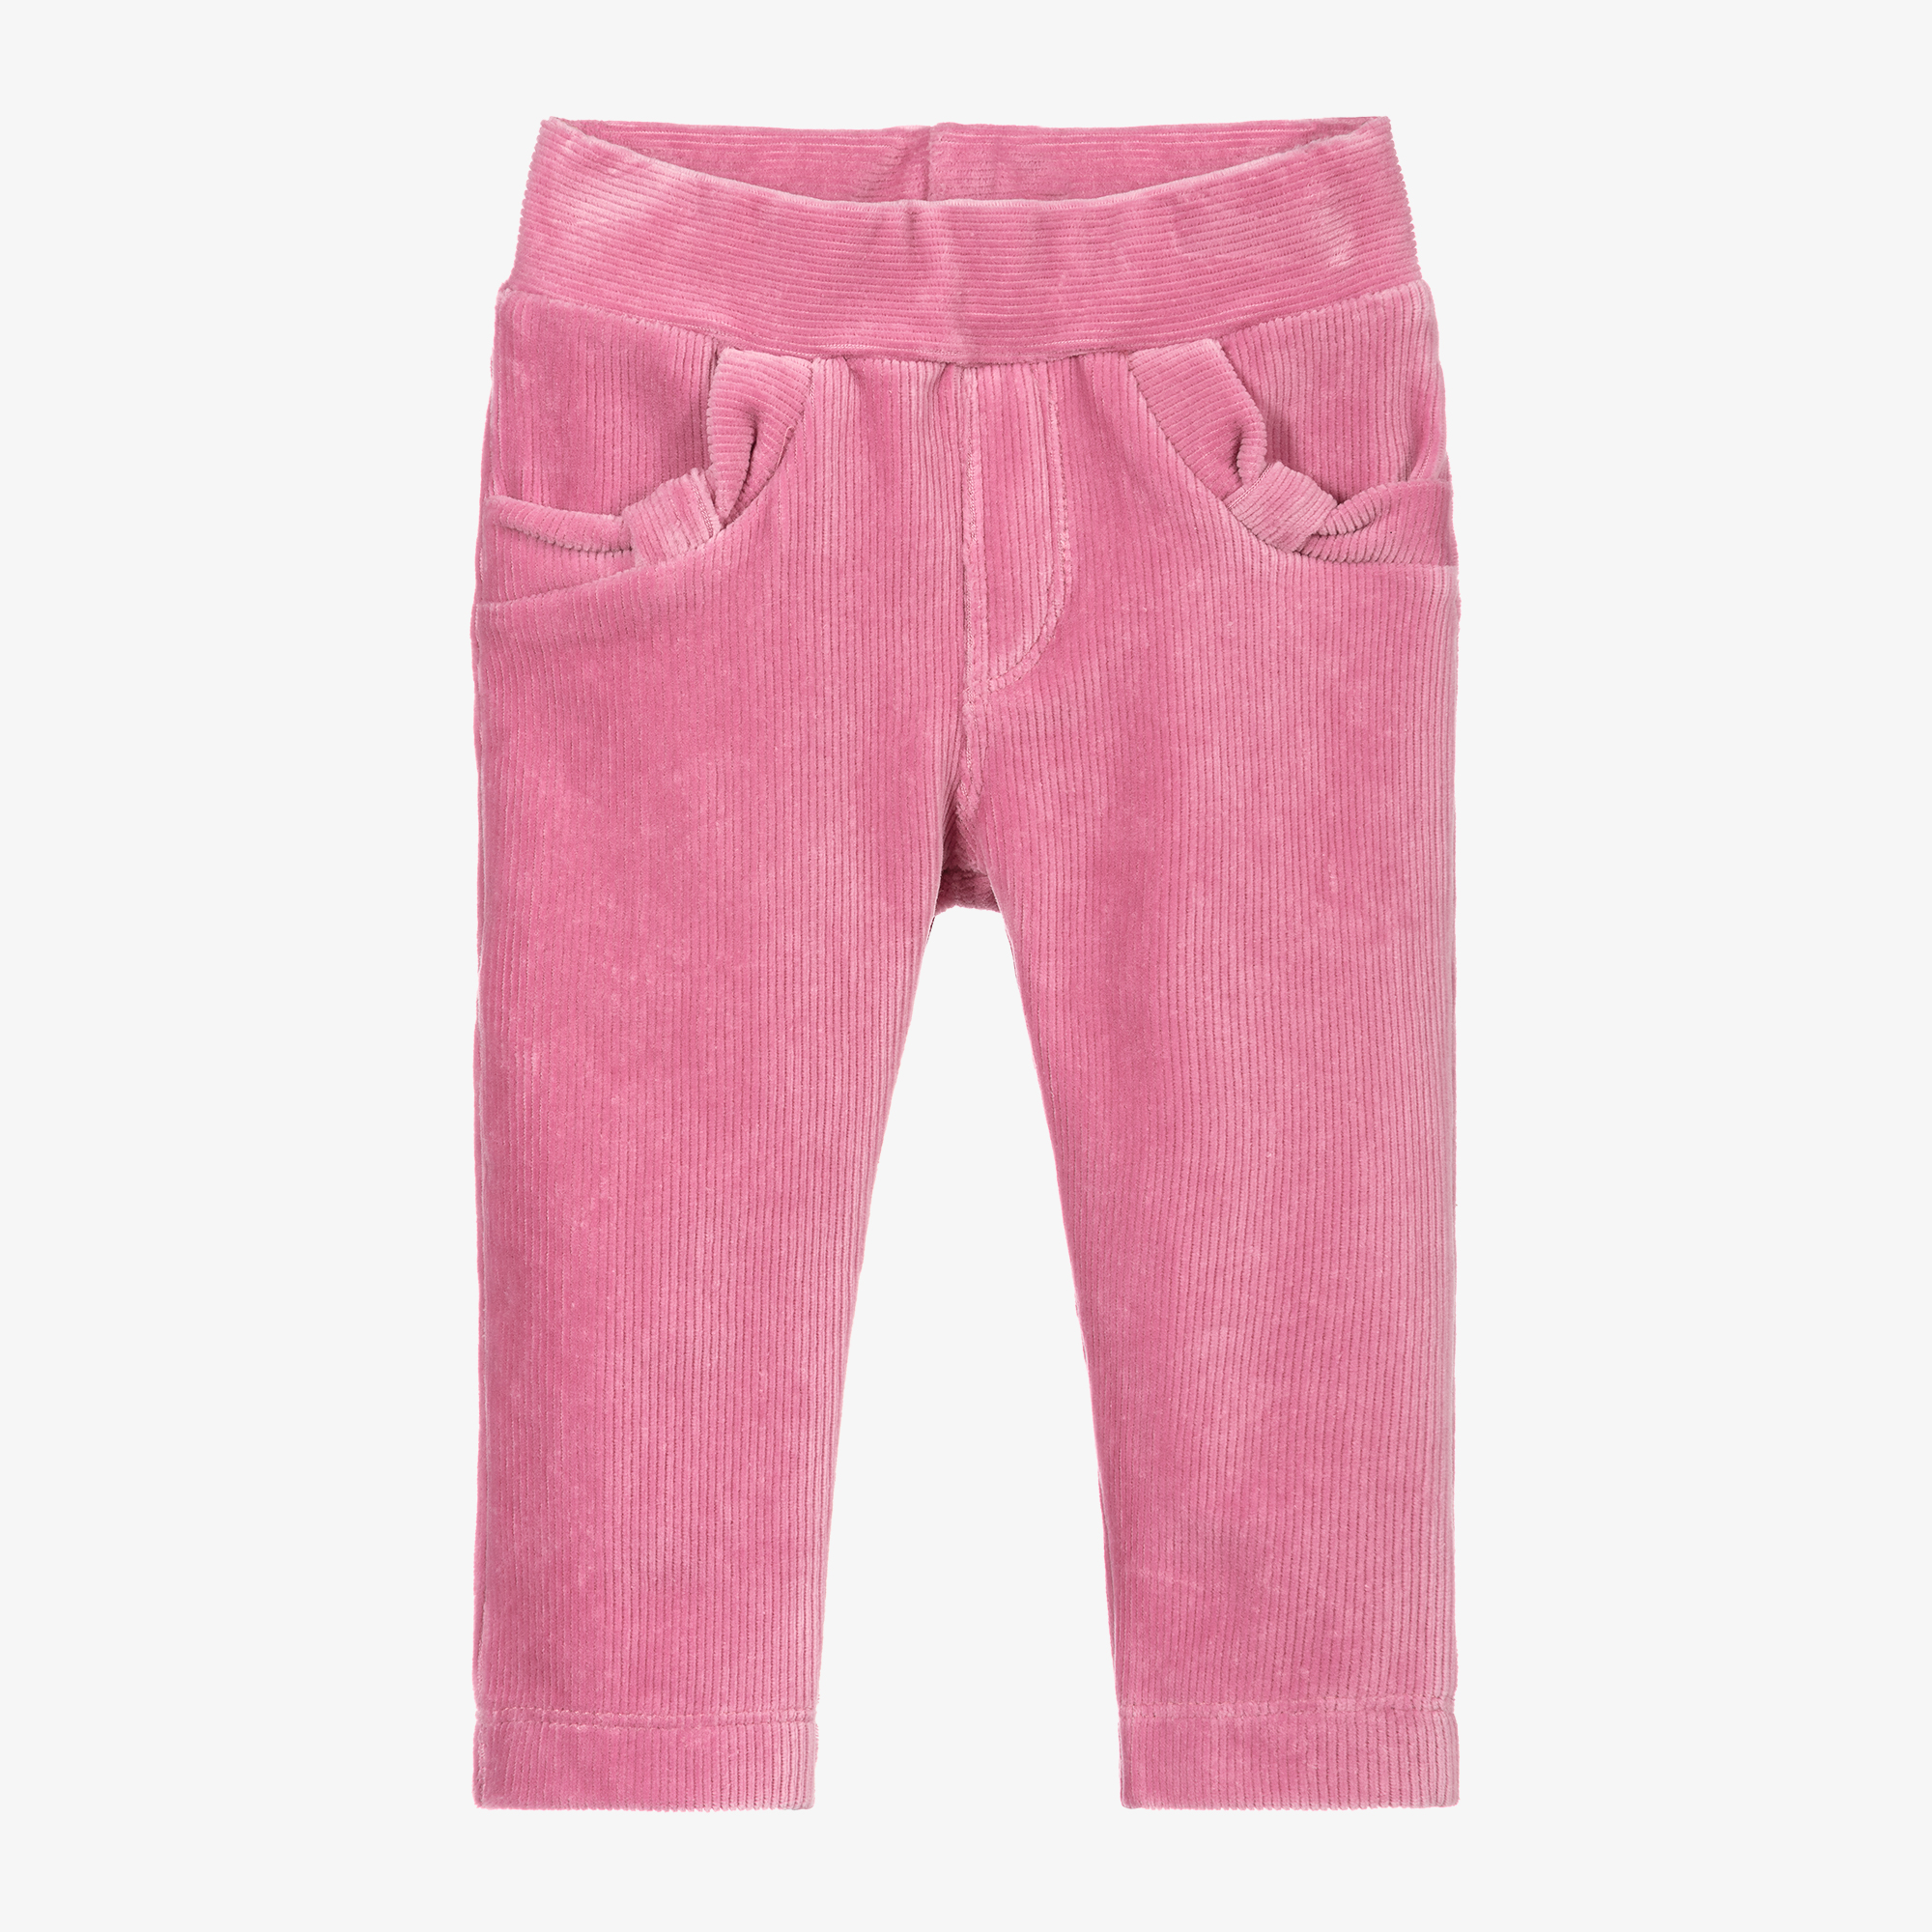 NWT Gymboree Girl Pink Corduroy Pants Pull on Pants Outlet 8,12